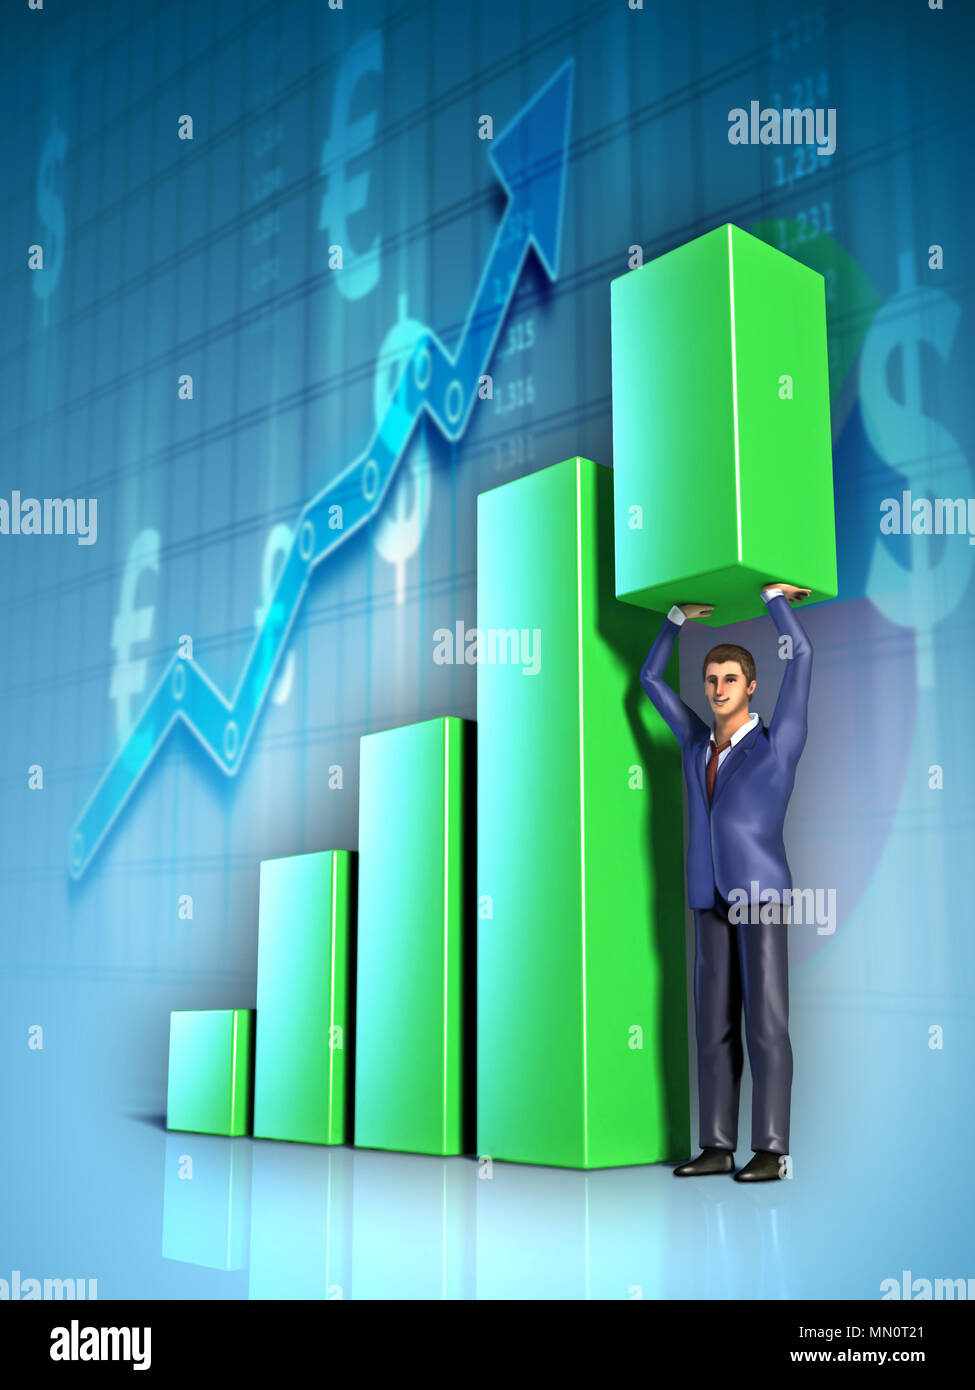 Businessman push with its hands the highest section of a bar graph. Digital illustration. Stock Photo